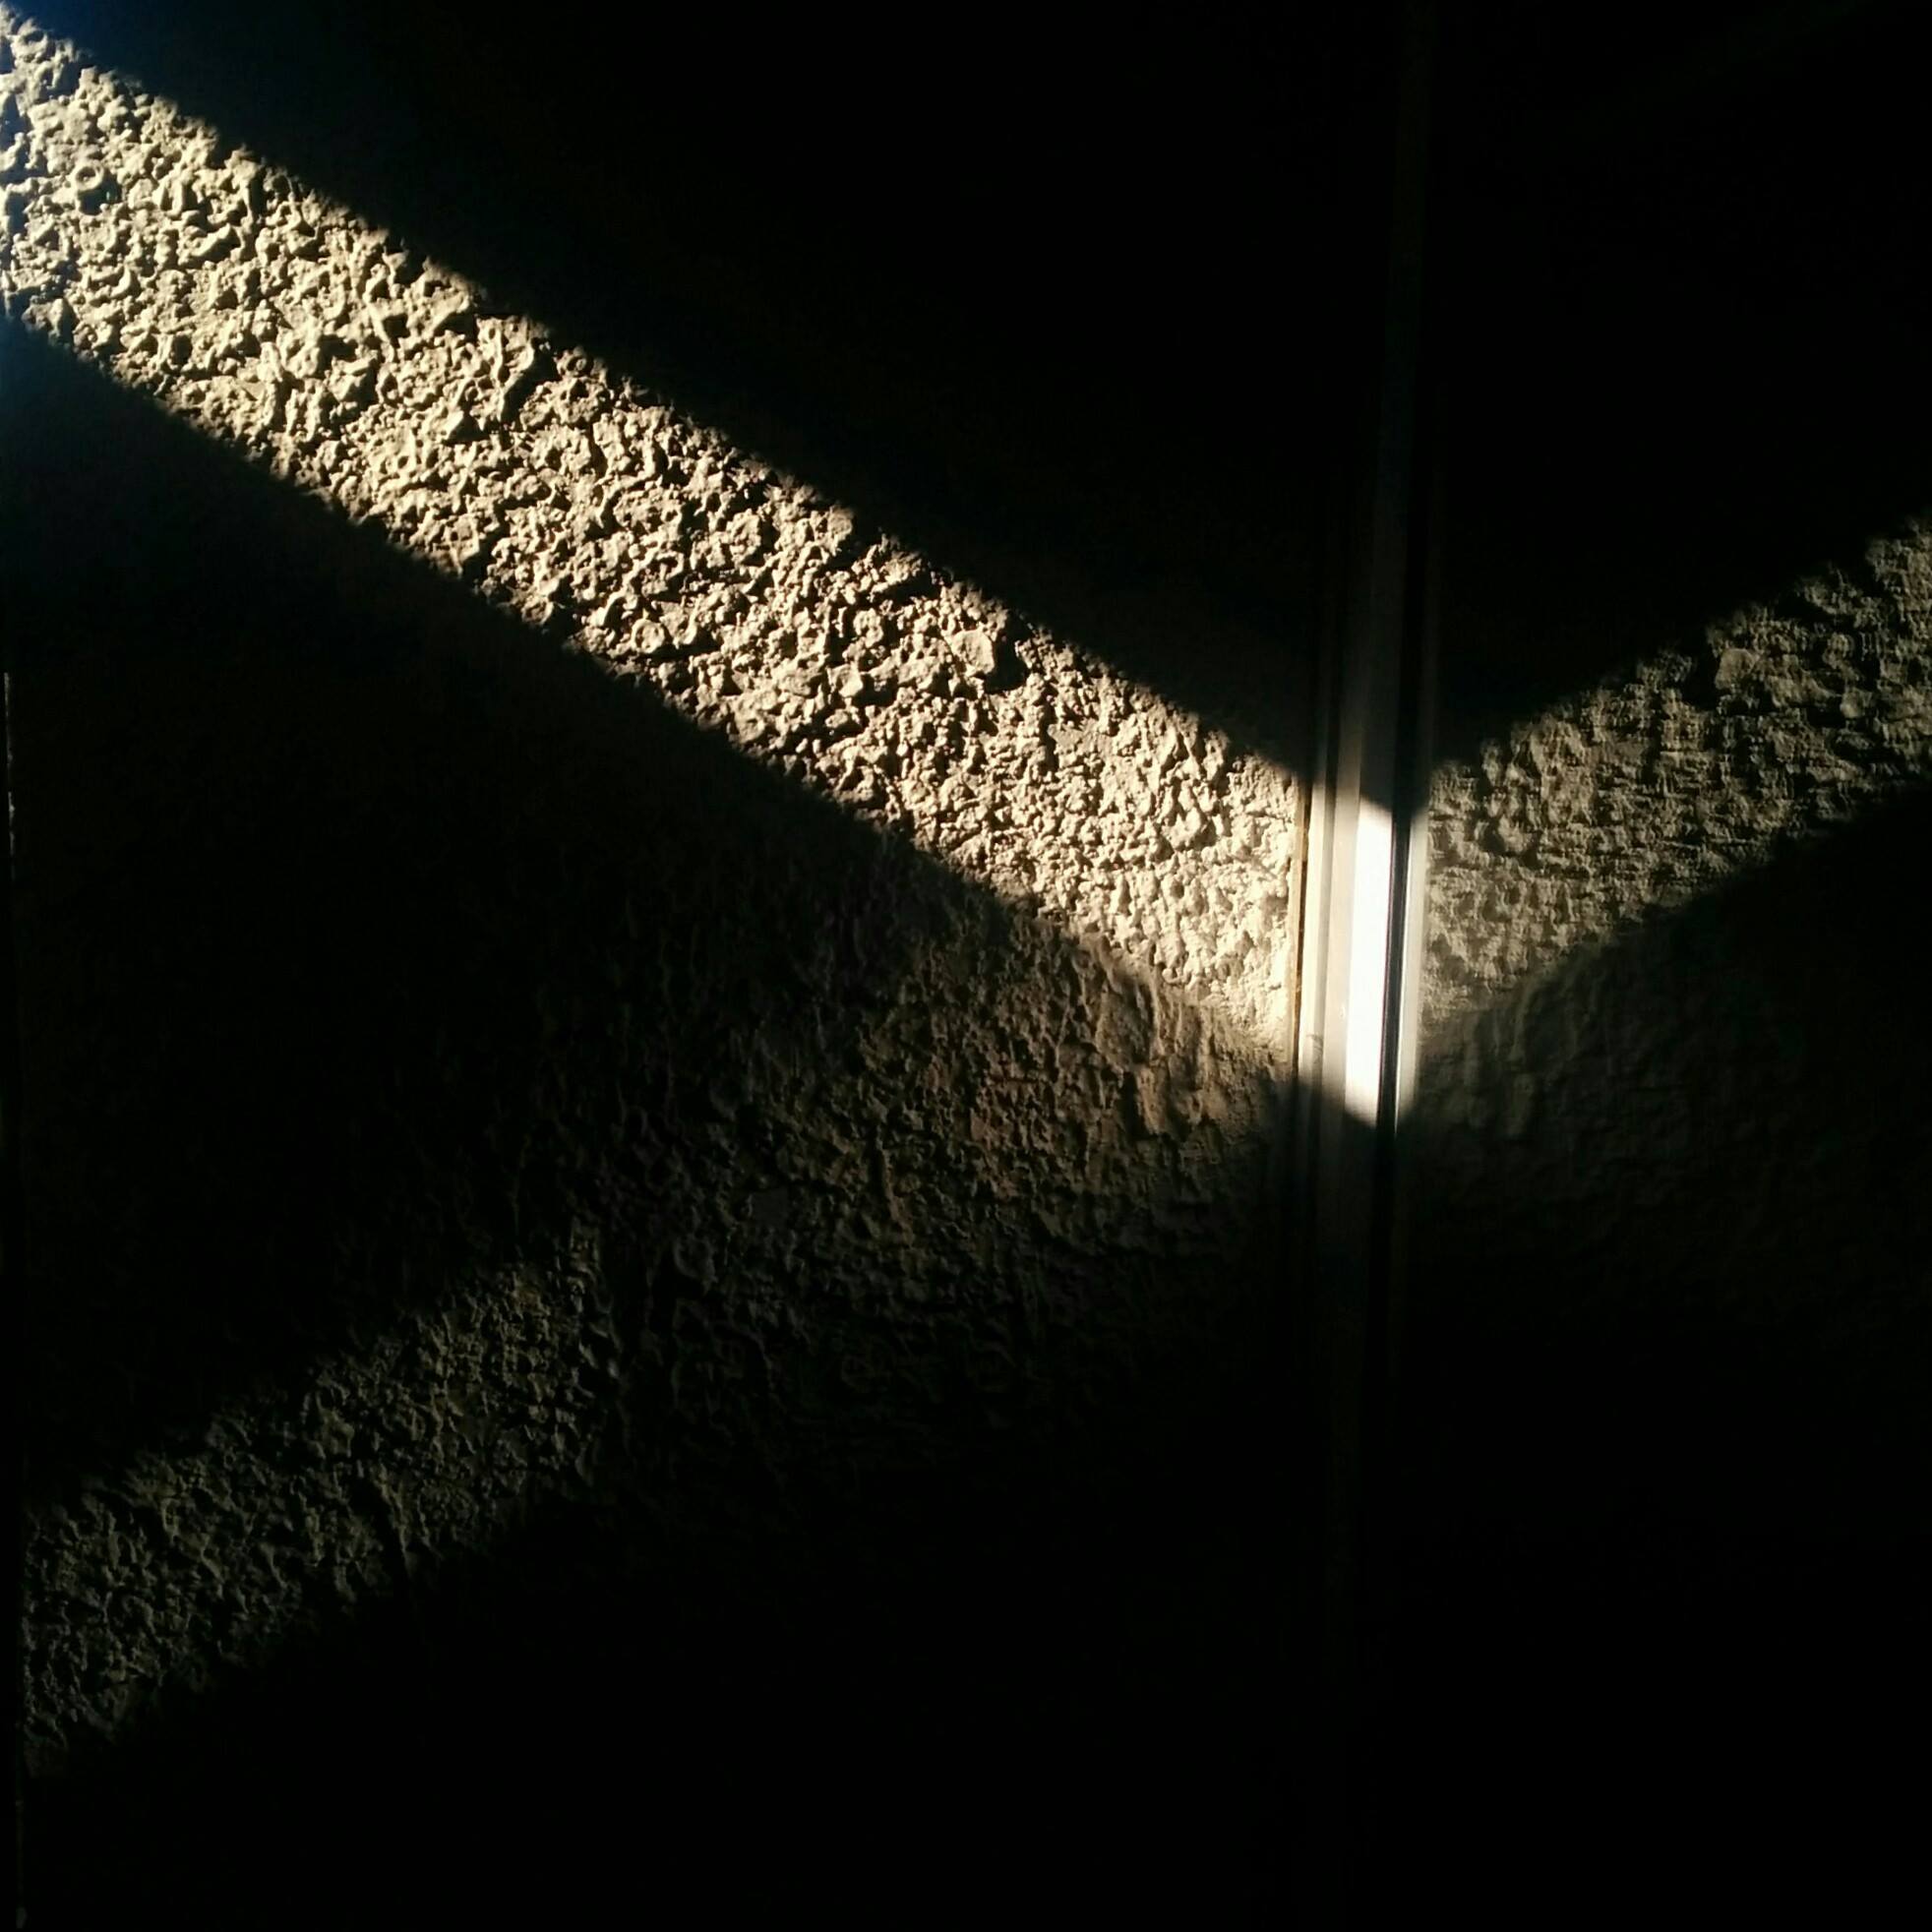 reflection of a light x road